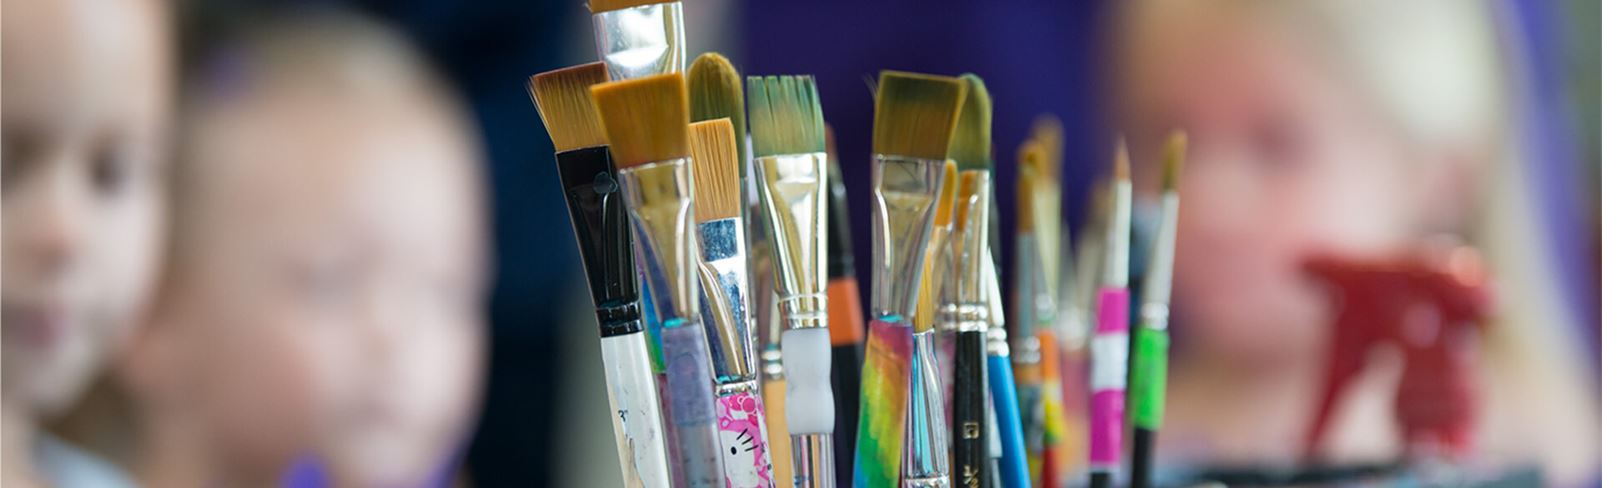 Paint brushes in Broomfield school in Anthem Colorado